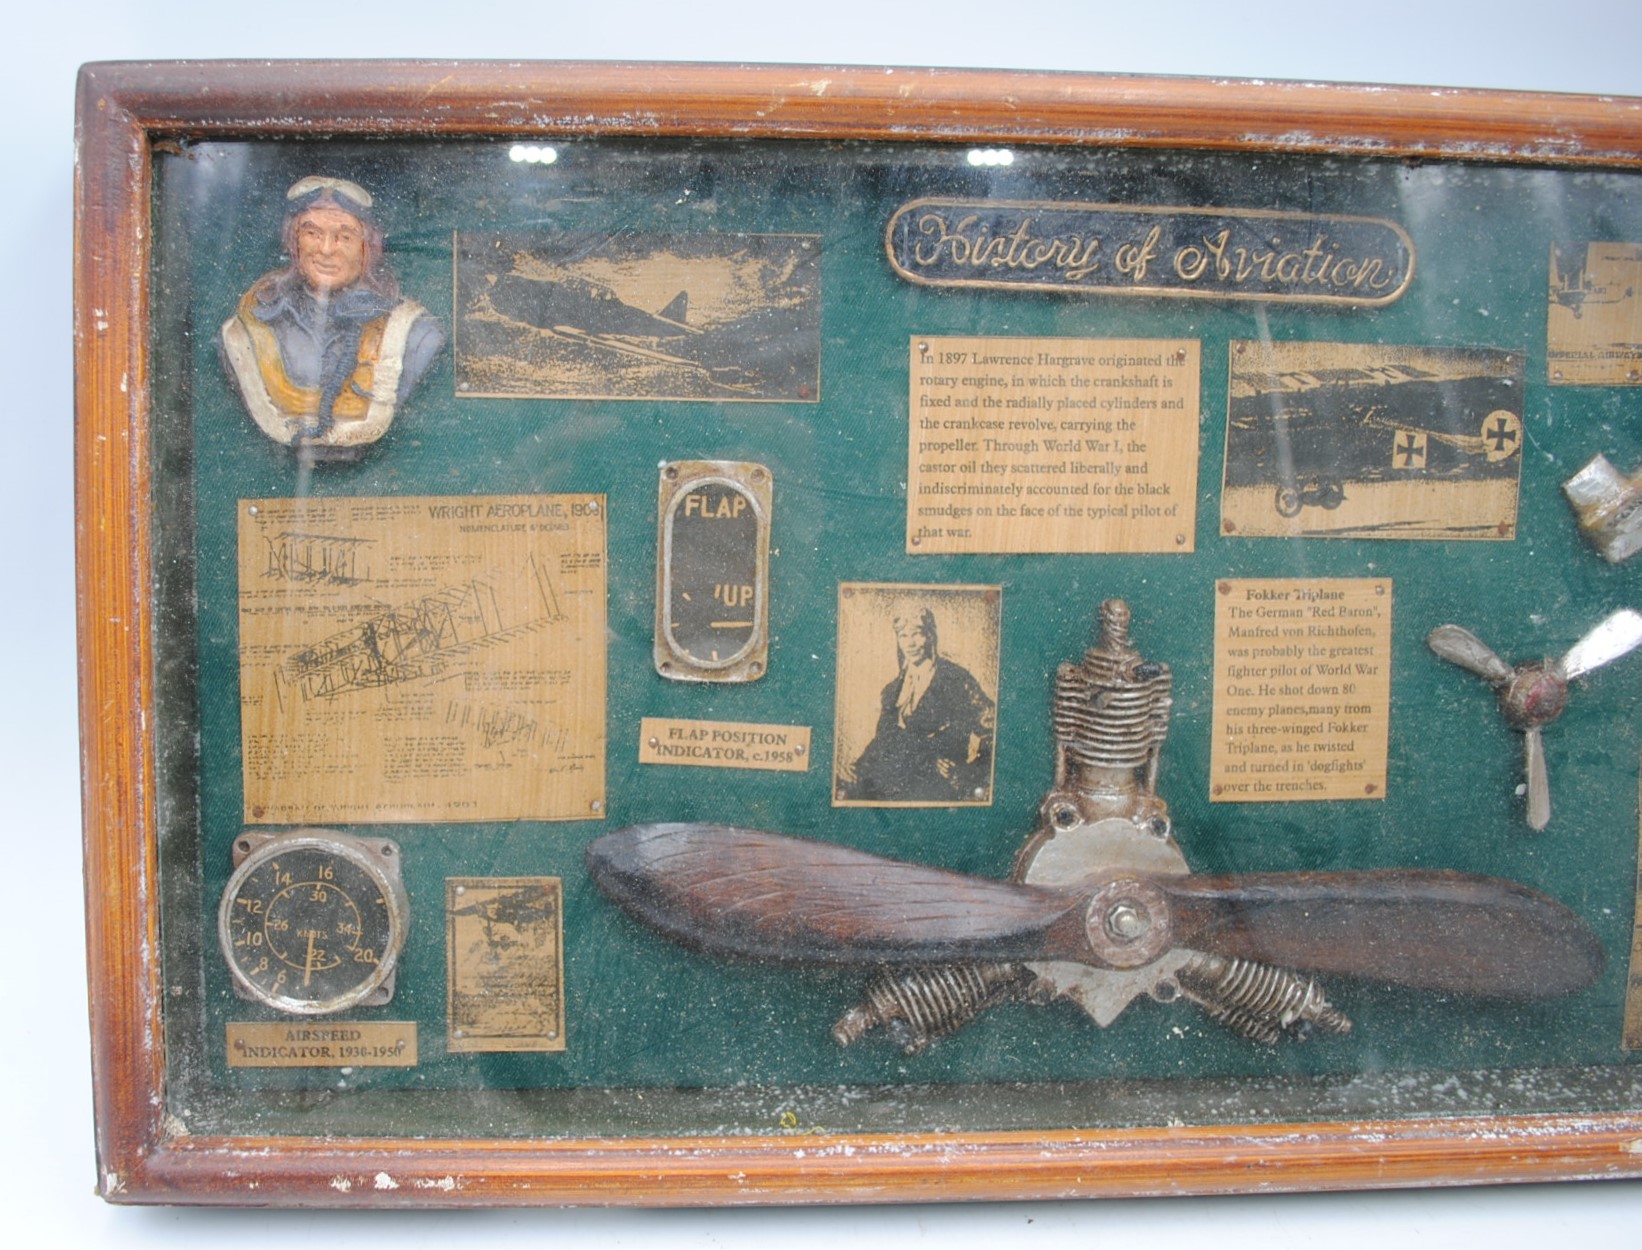 A 'History of Aviation' display case - 28.5cm x 52.5cm - Image 2 of 4